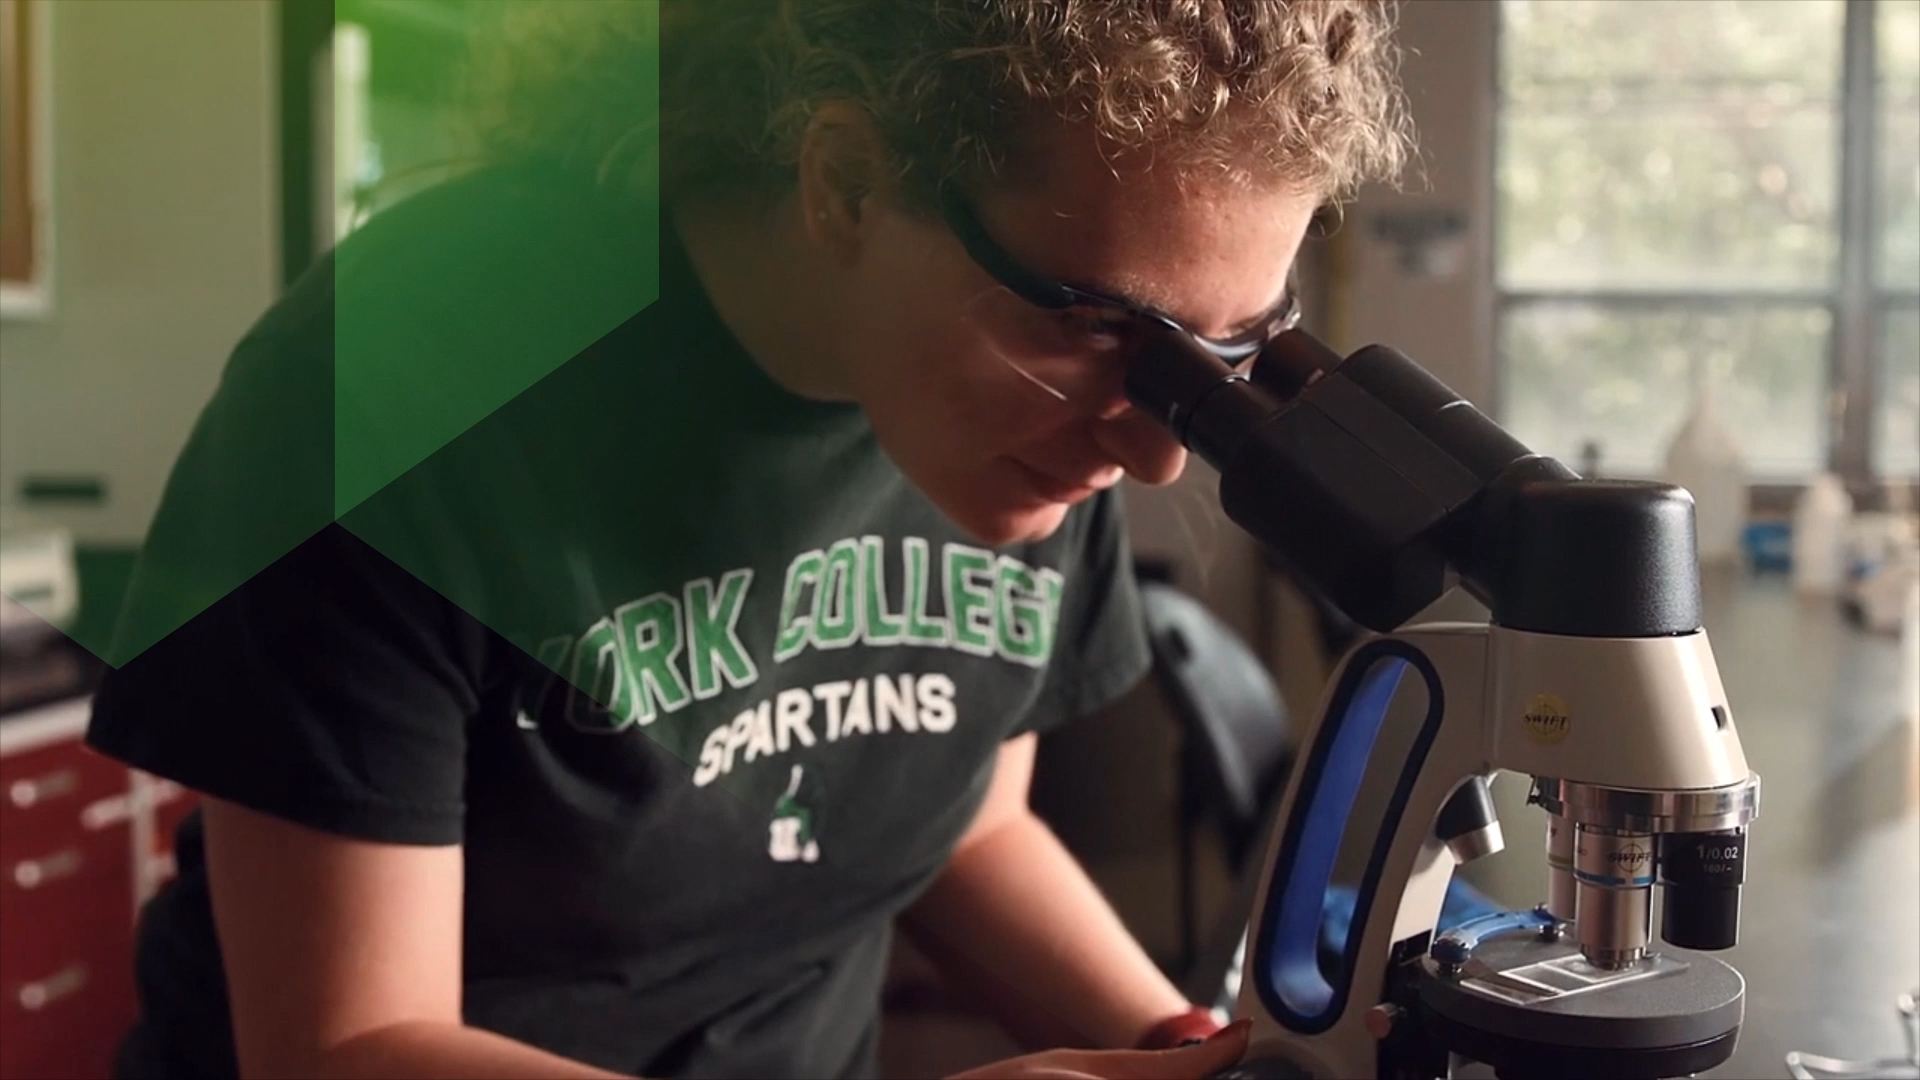 Footage of Student using microscope at York College